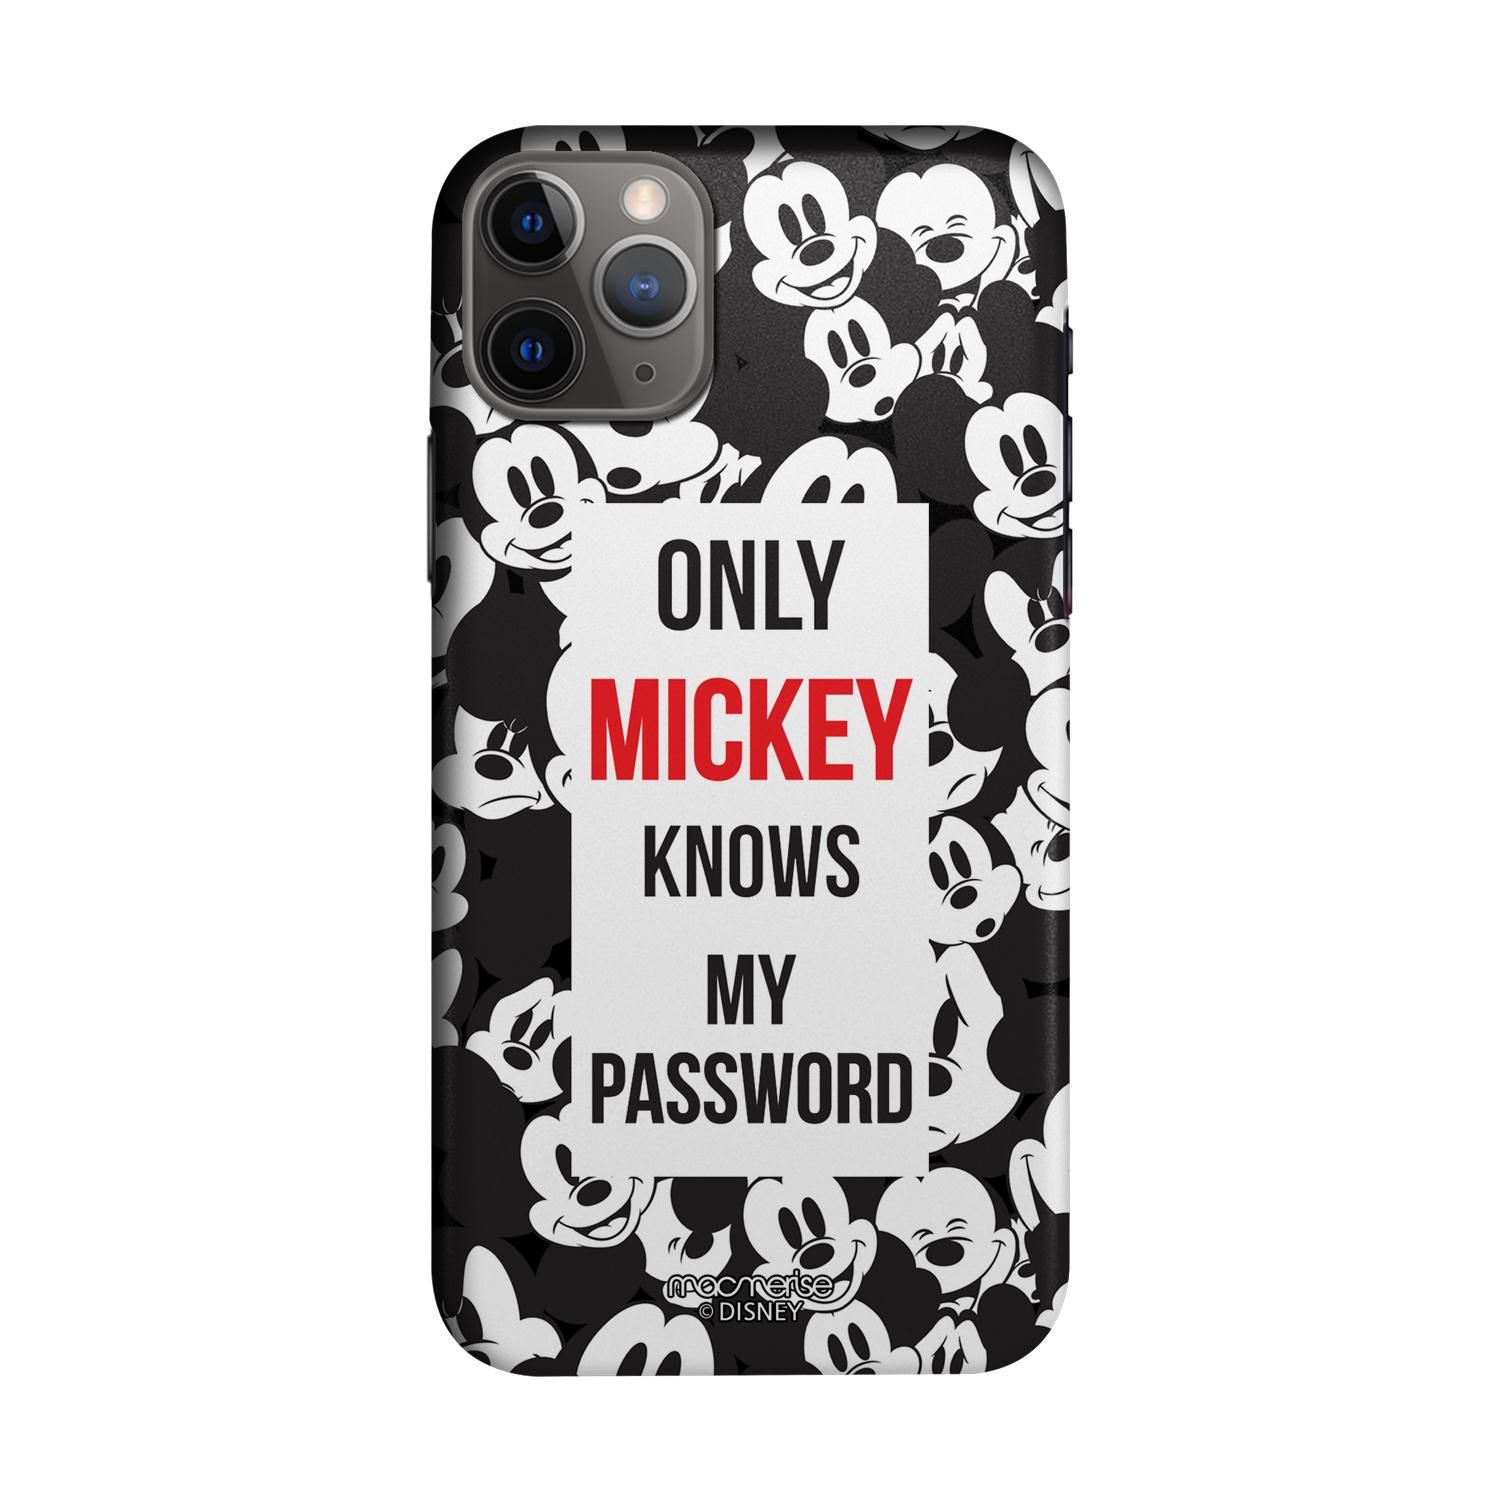 Buy Mickey my Password - Sleek Phone Case for iPhone 11 Pro Max Online